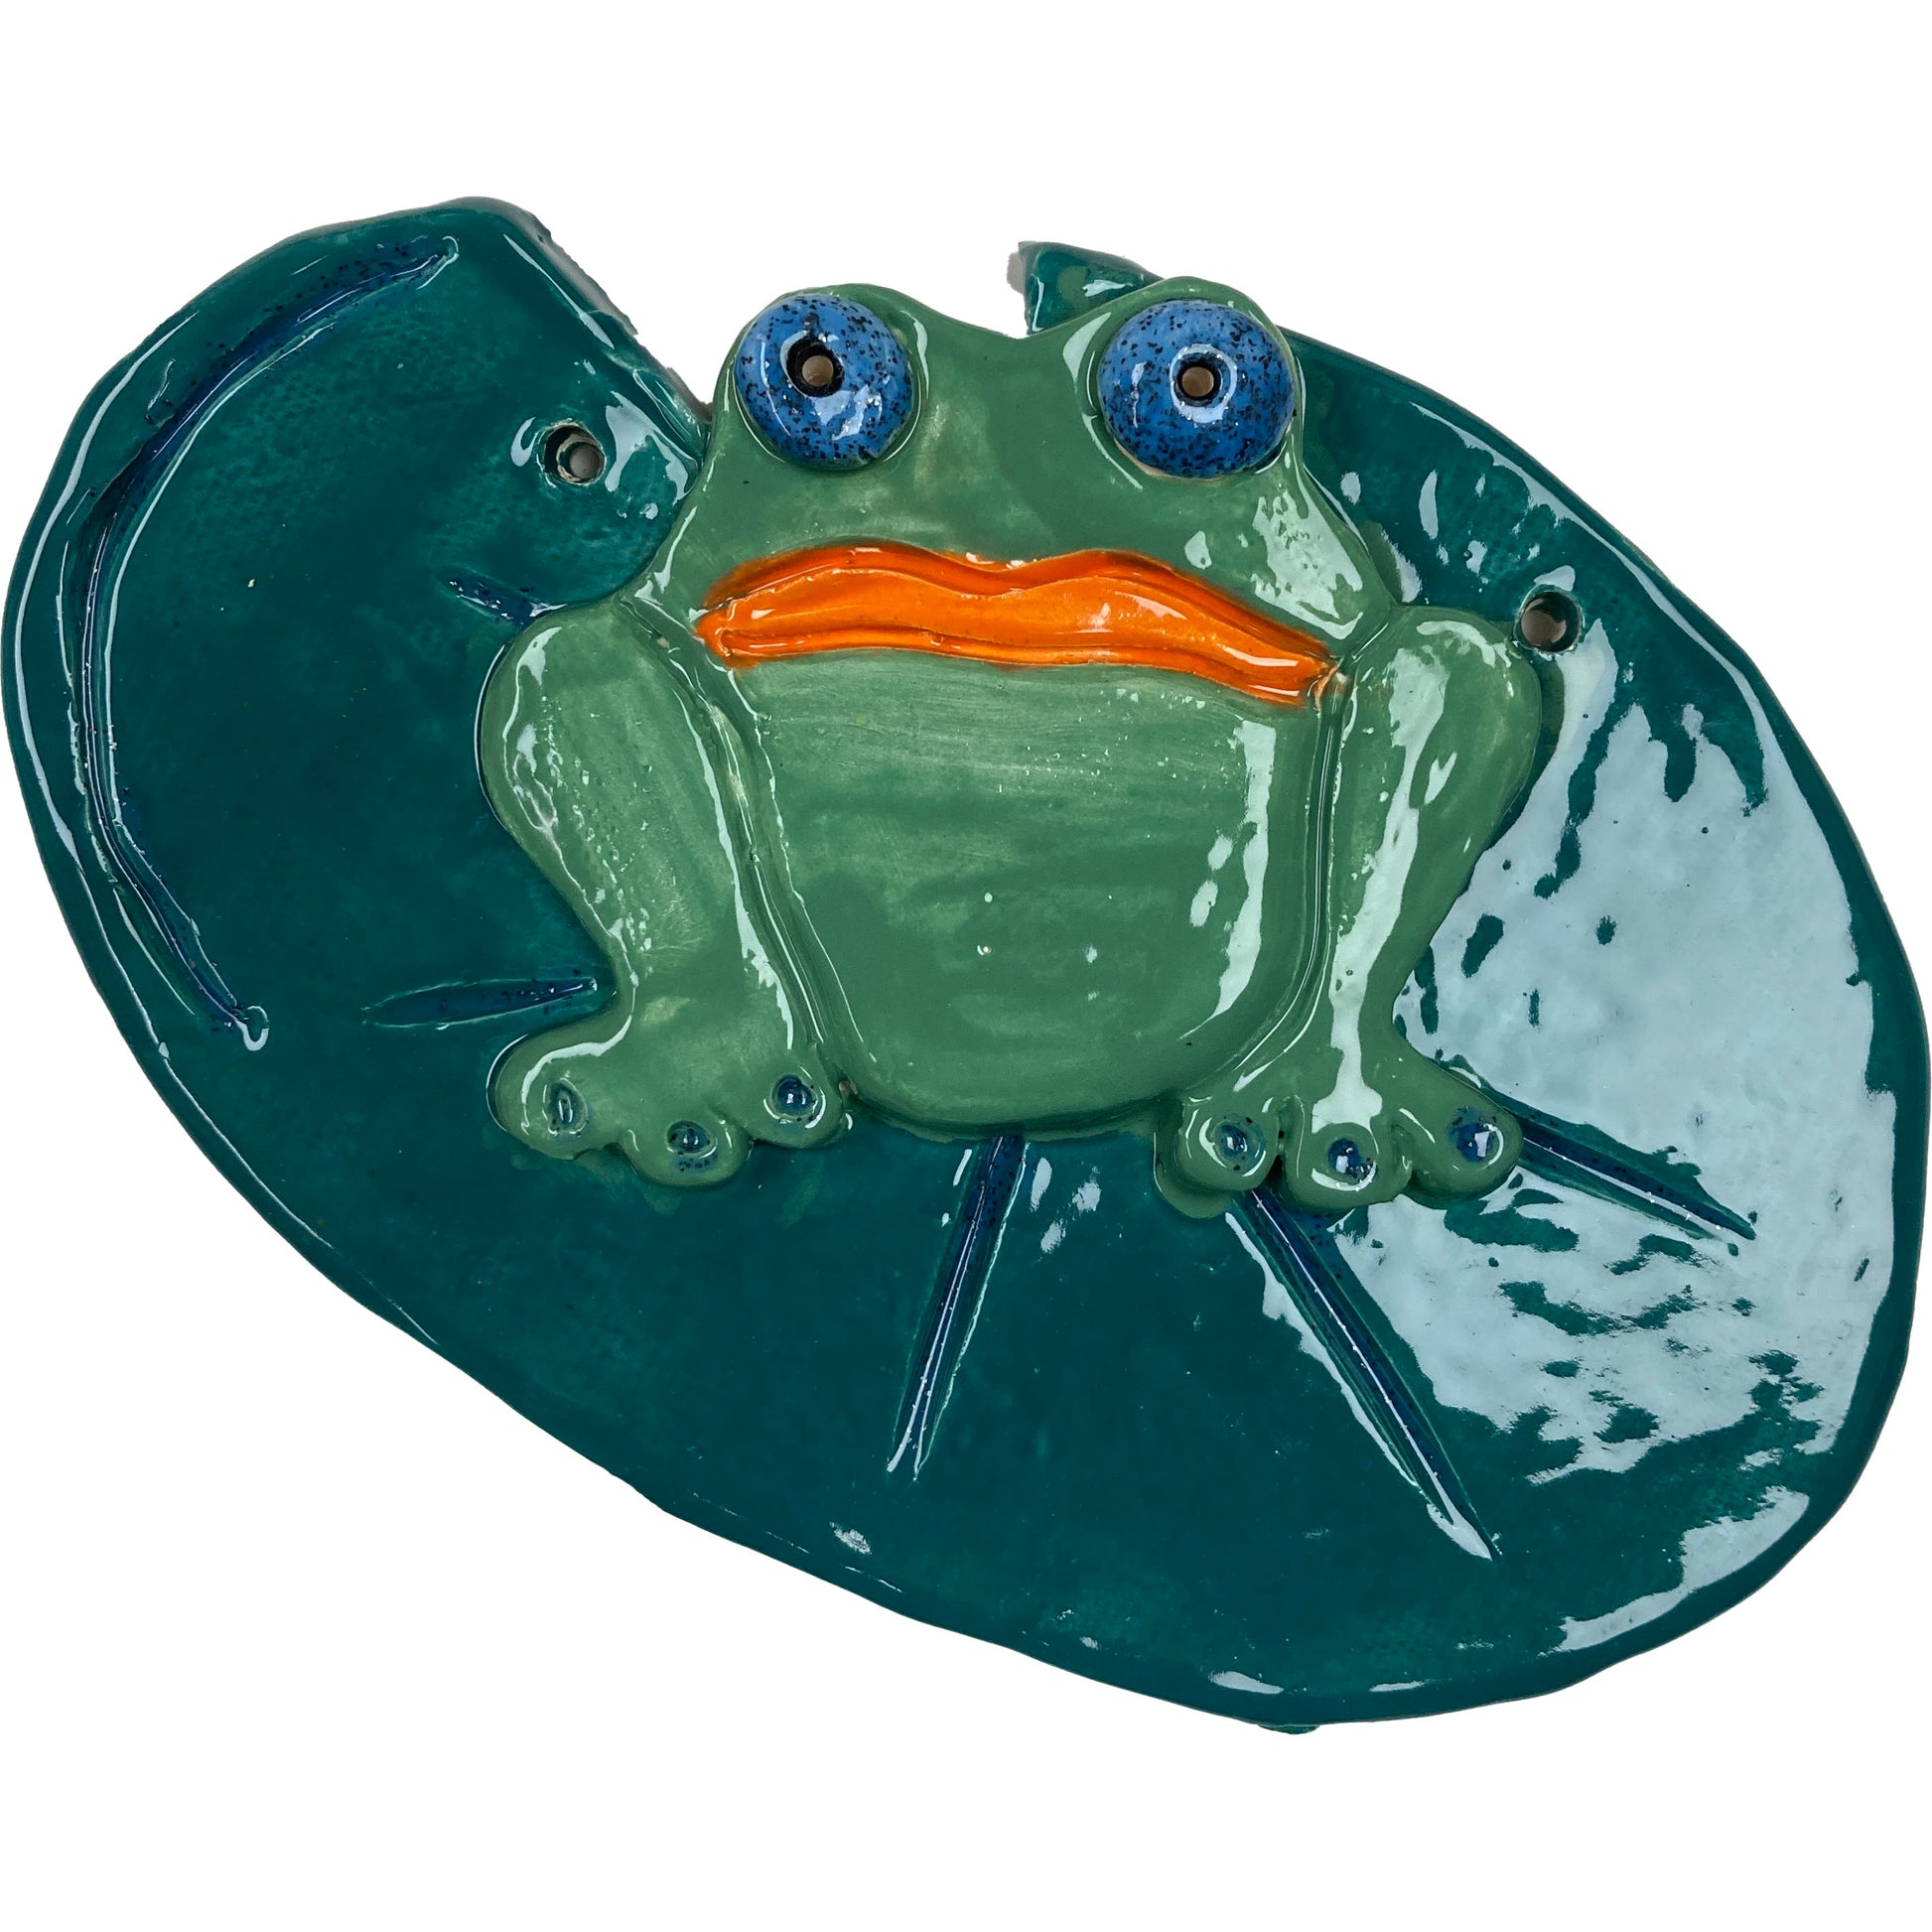 WATCH Resources Art Guild - Ceramic Arts Handmade Clay Crafts Frog 8-inch x 5-inch Glazed Fish-Frog by Lisa Uptain